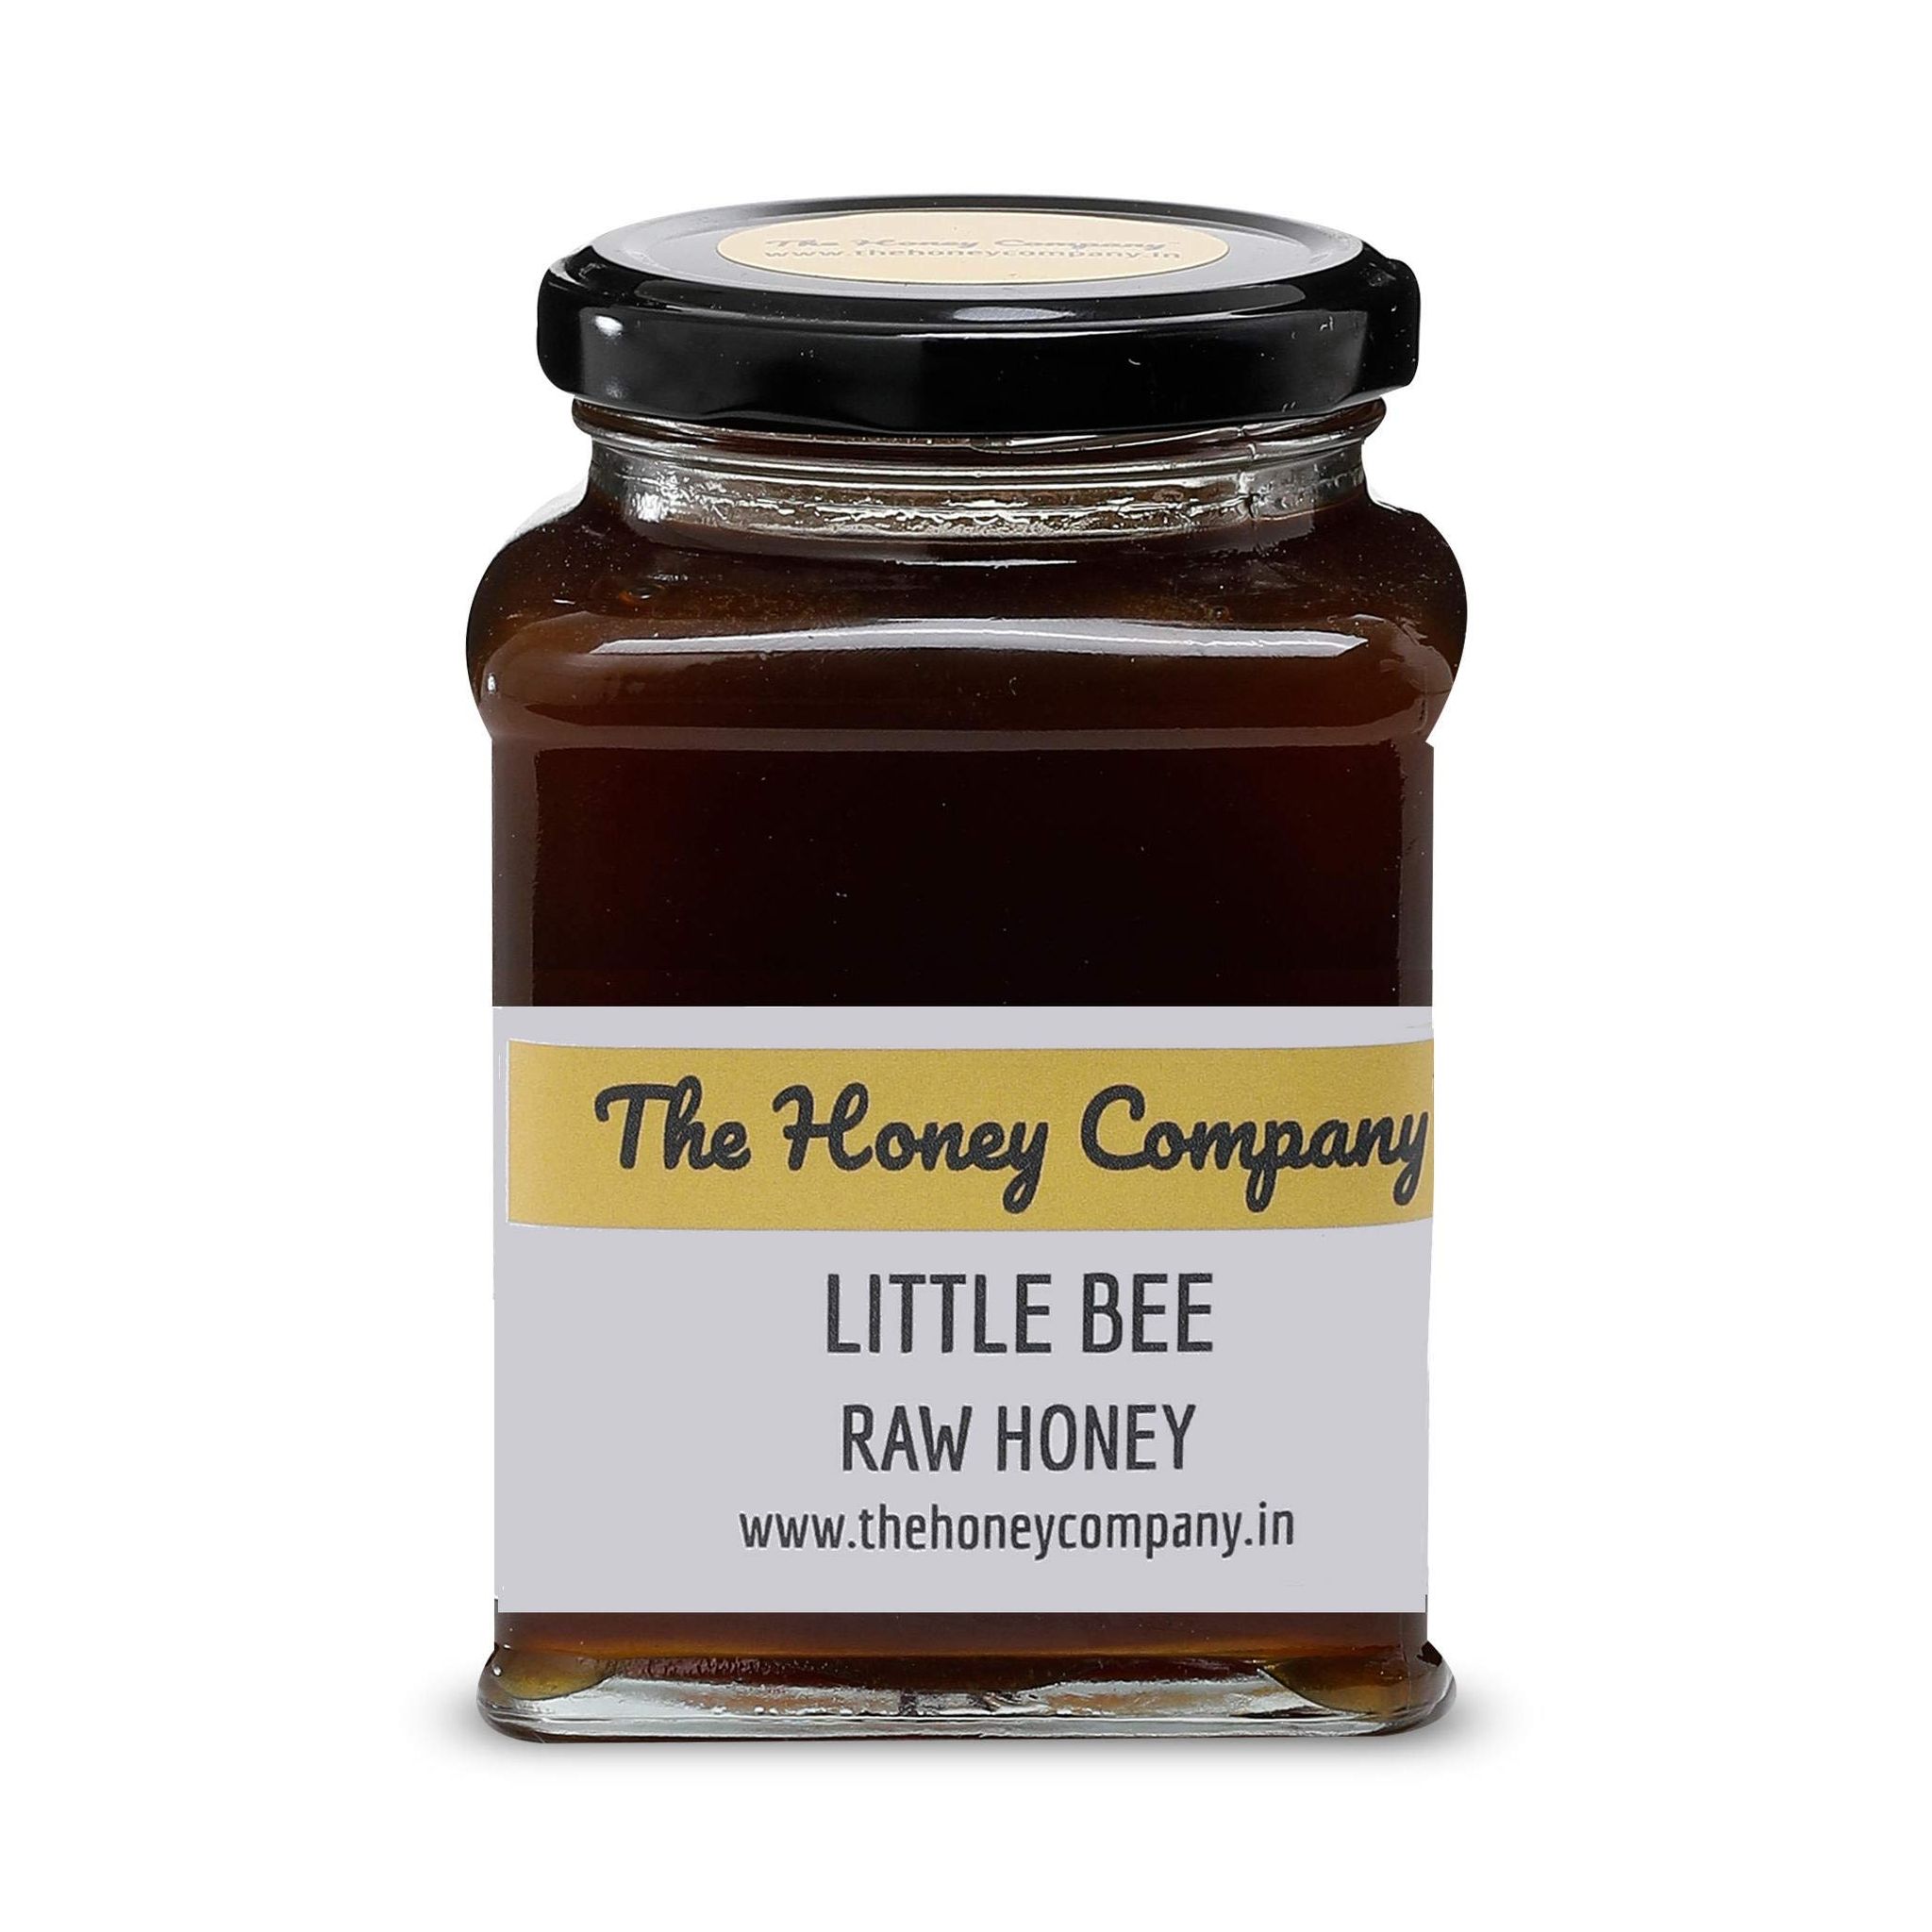 The Honey Company Little Bee Raw Honey 550g 100% Pure Natural Raw Unprocessed Unheated Unpasteurised Unfiltered